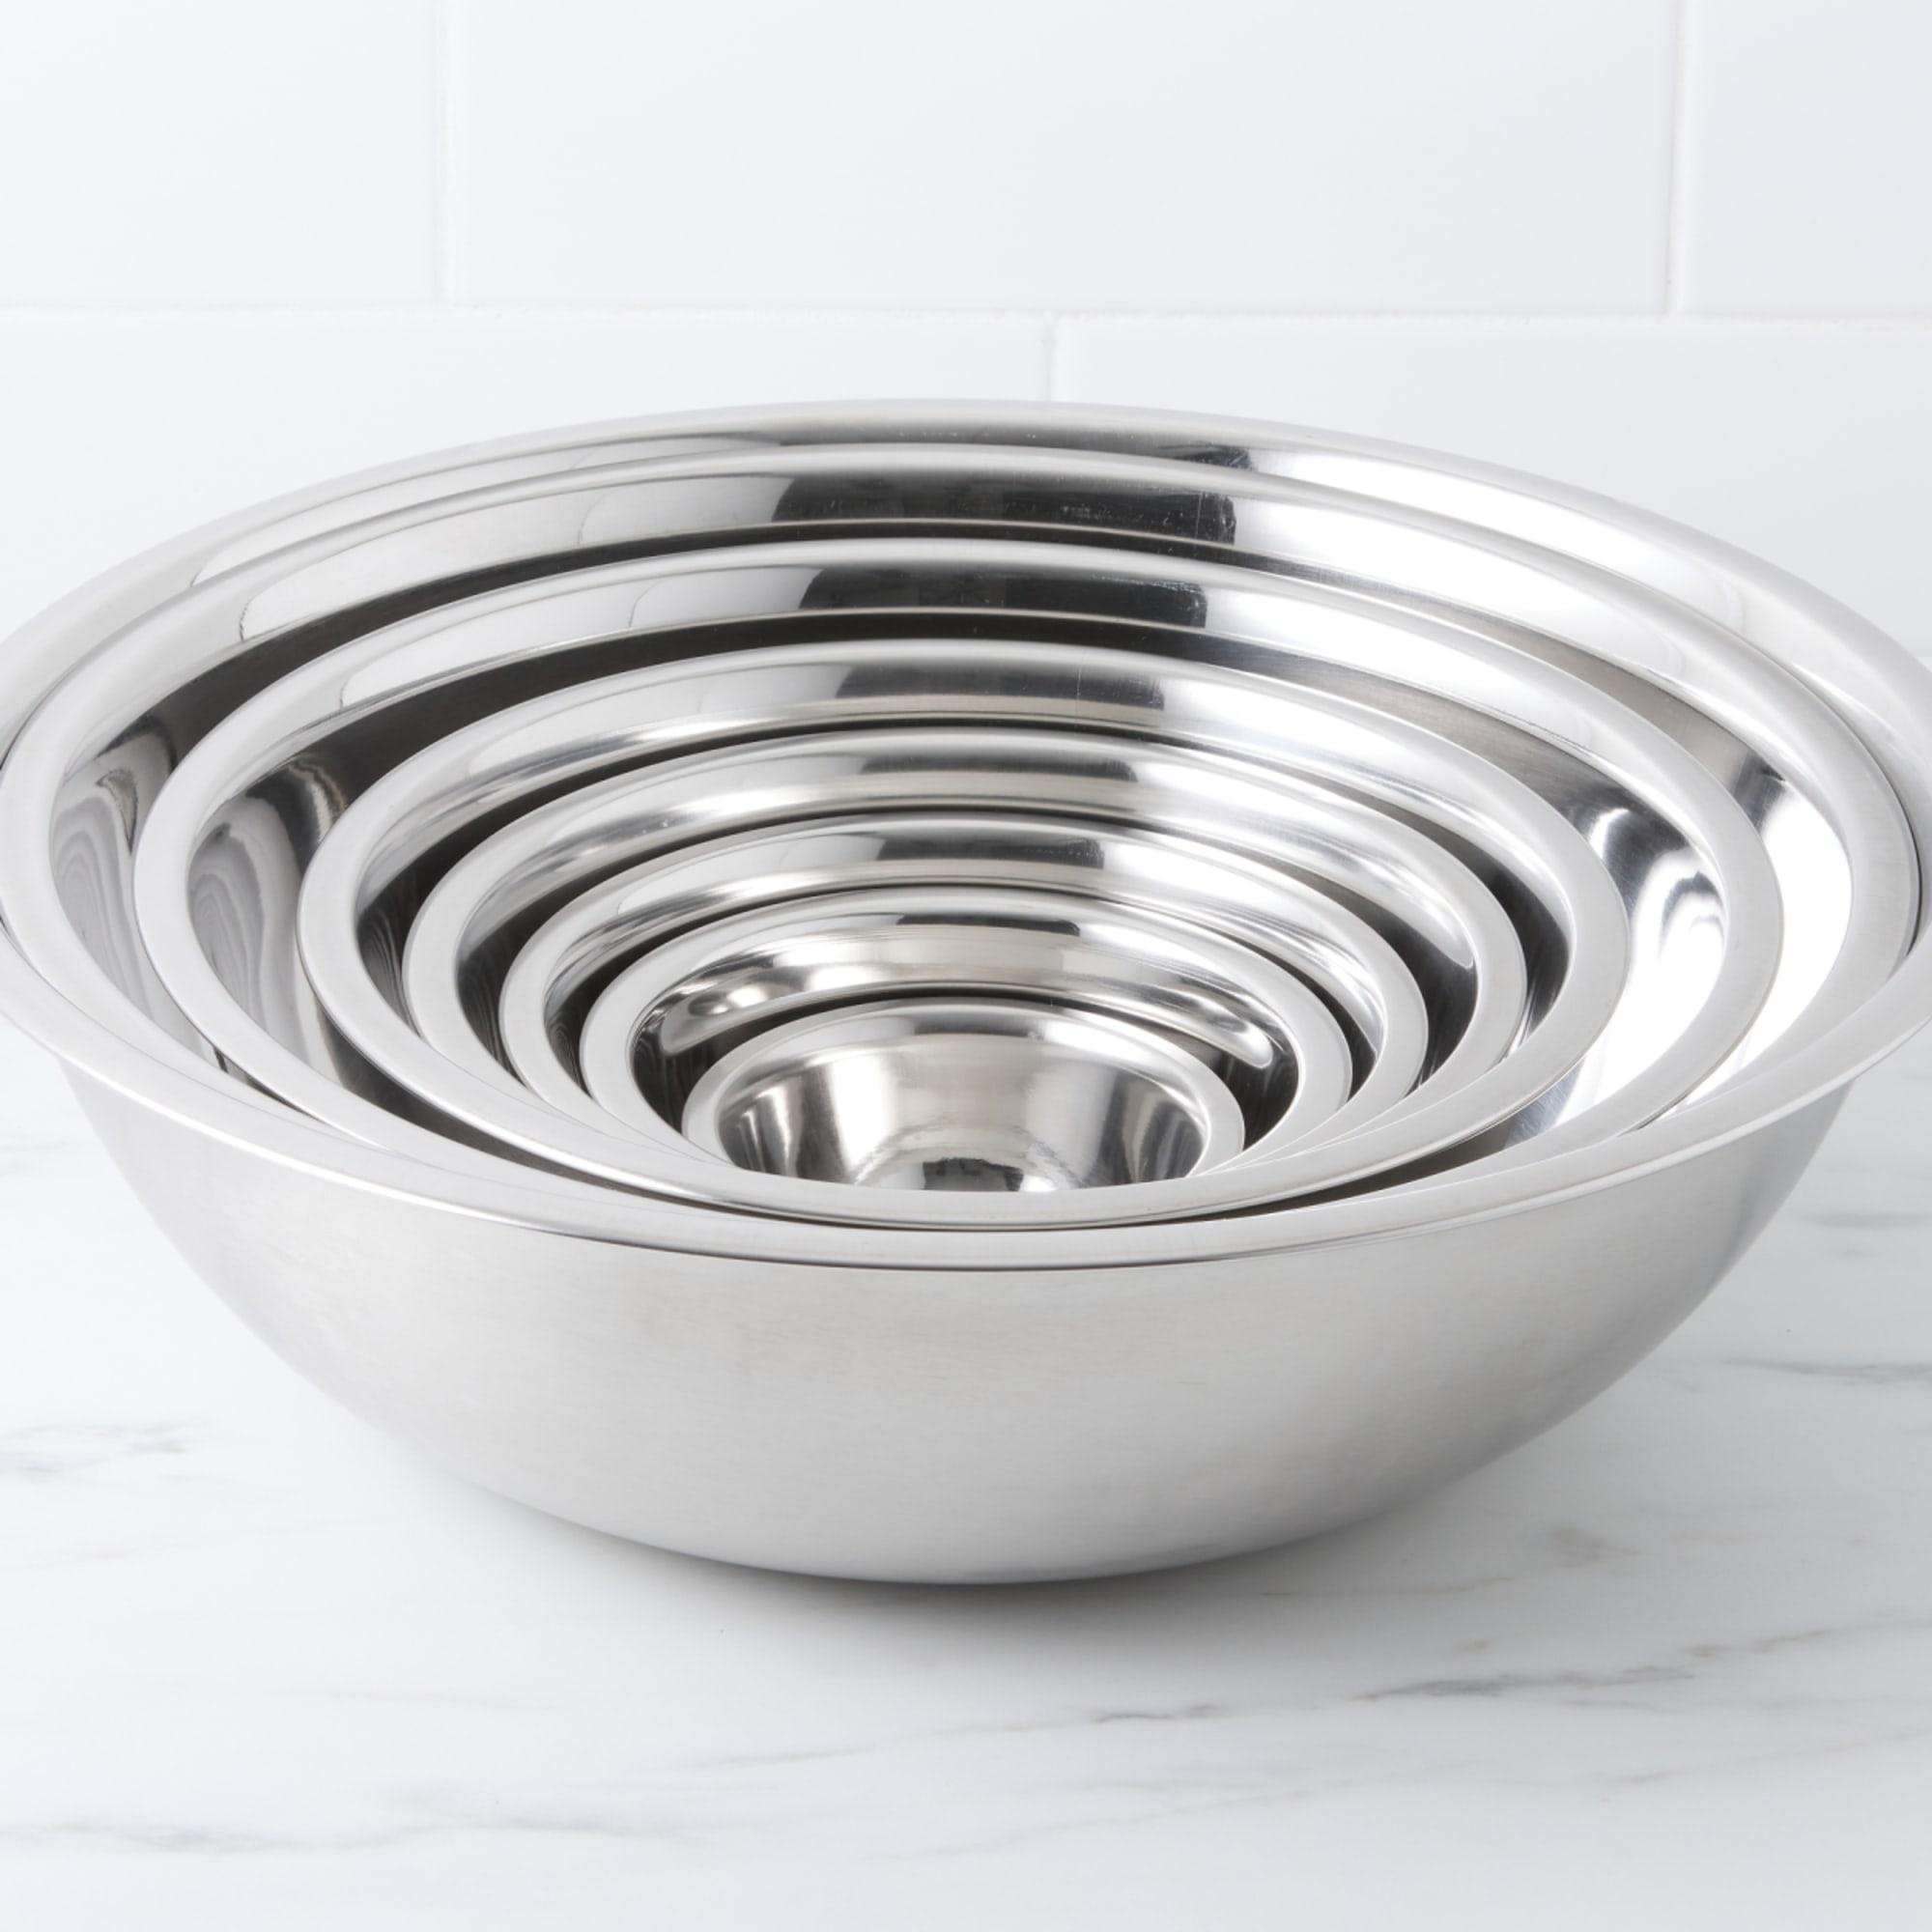 Kitchen Pro Mixwell Stainless Steel Mixing Bowl 48cm - 17L Image 5